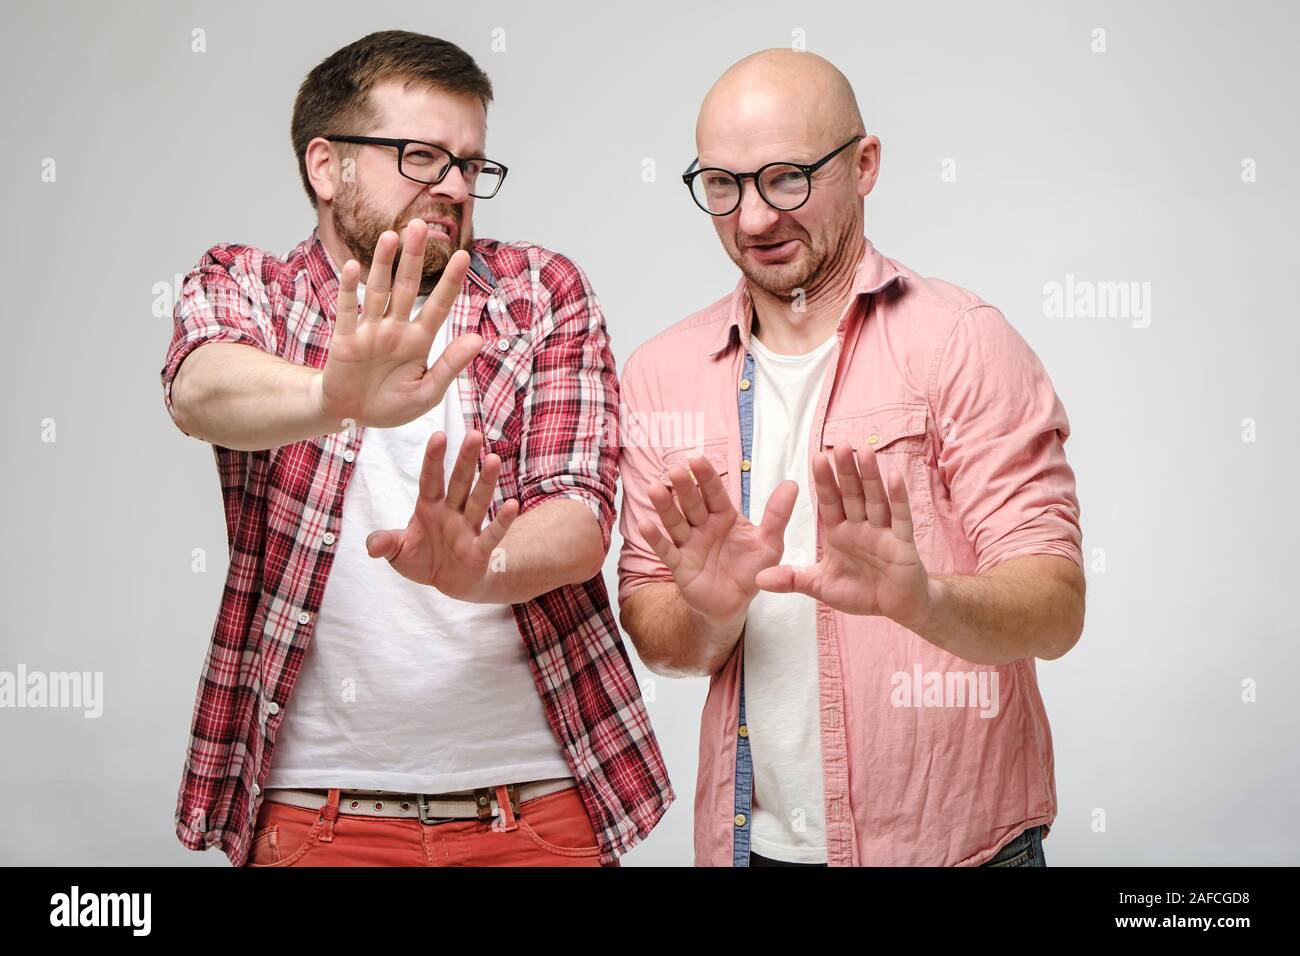 Friends look at the camera in disgust and defend themselves by making a gesture of palm forward. Negative emotions. Stock Photo